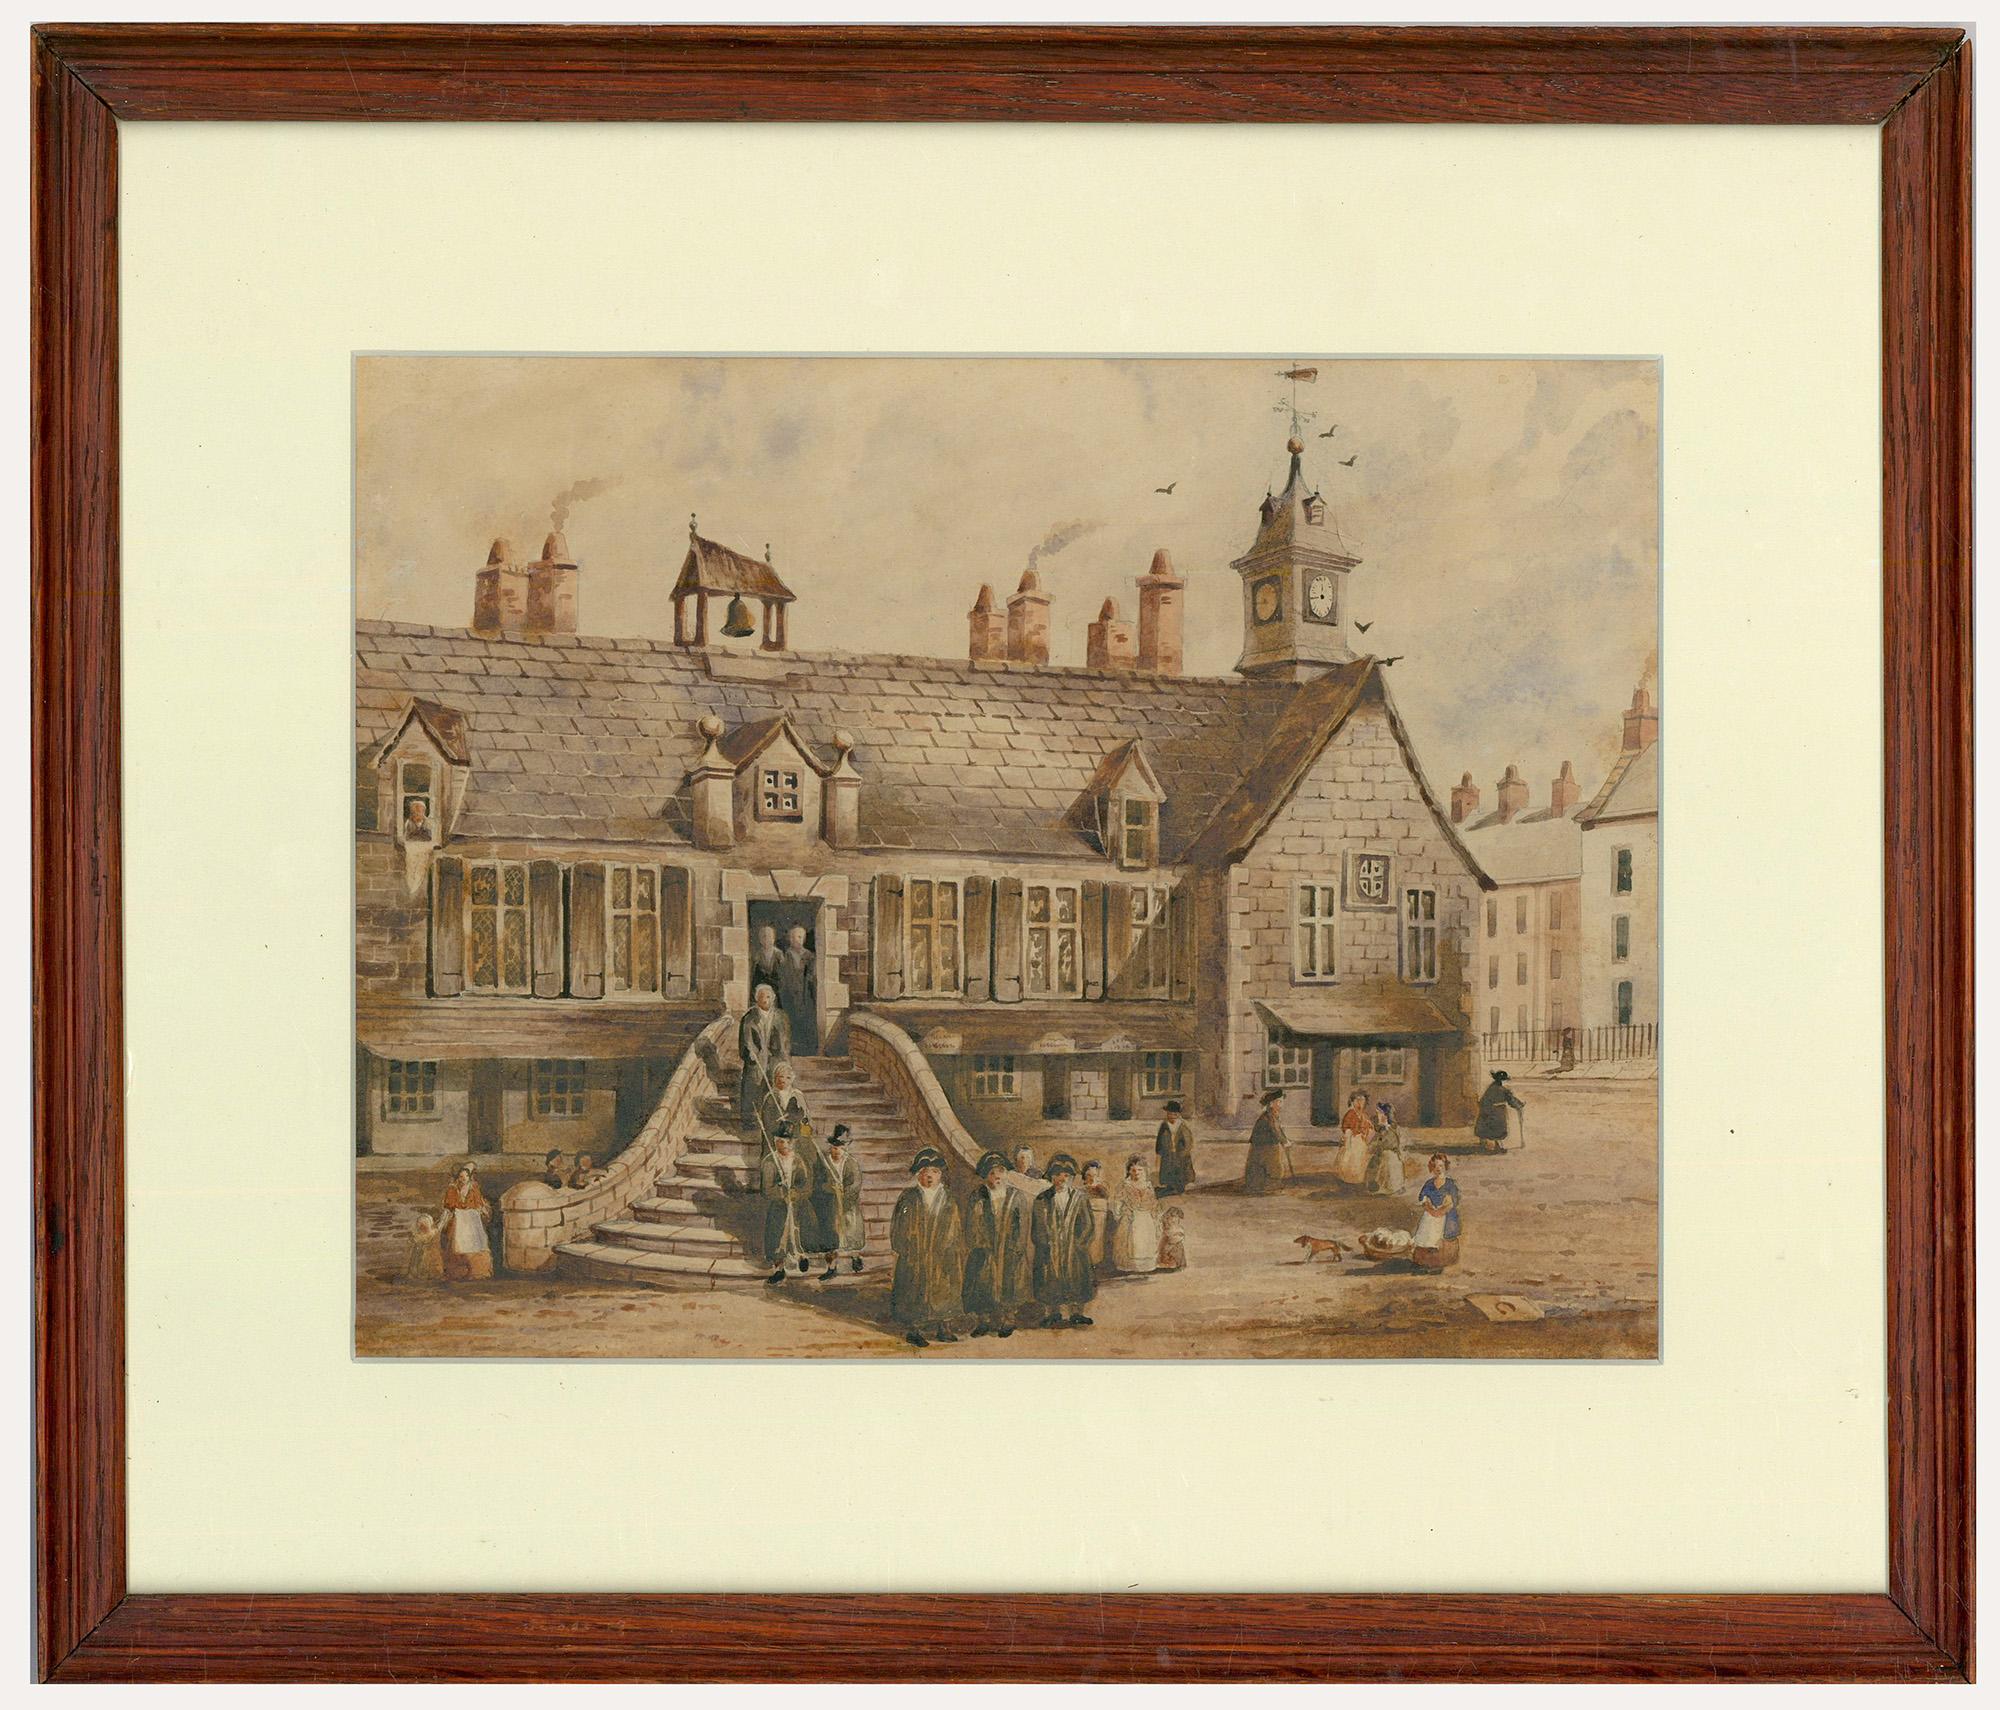 Unknown Landscape Art - Framed 19th Century Watercolour - Carlisle Town Hall